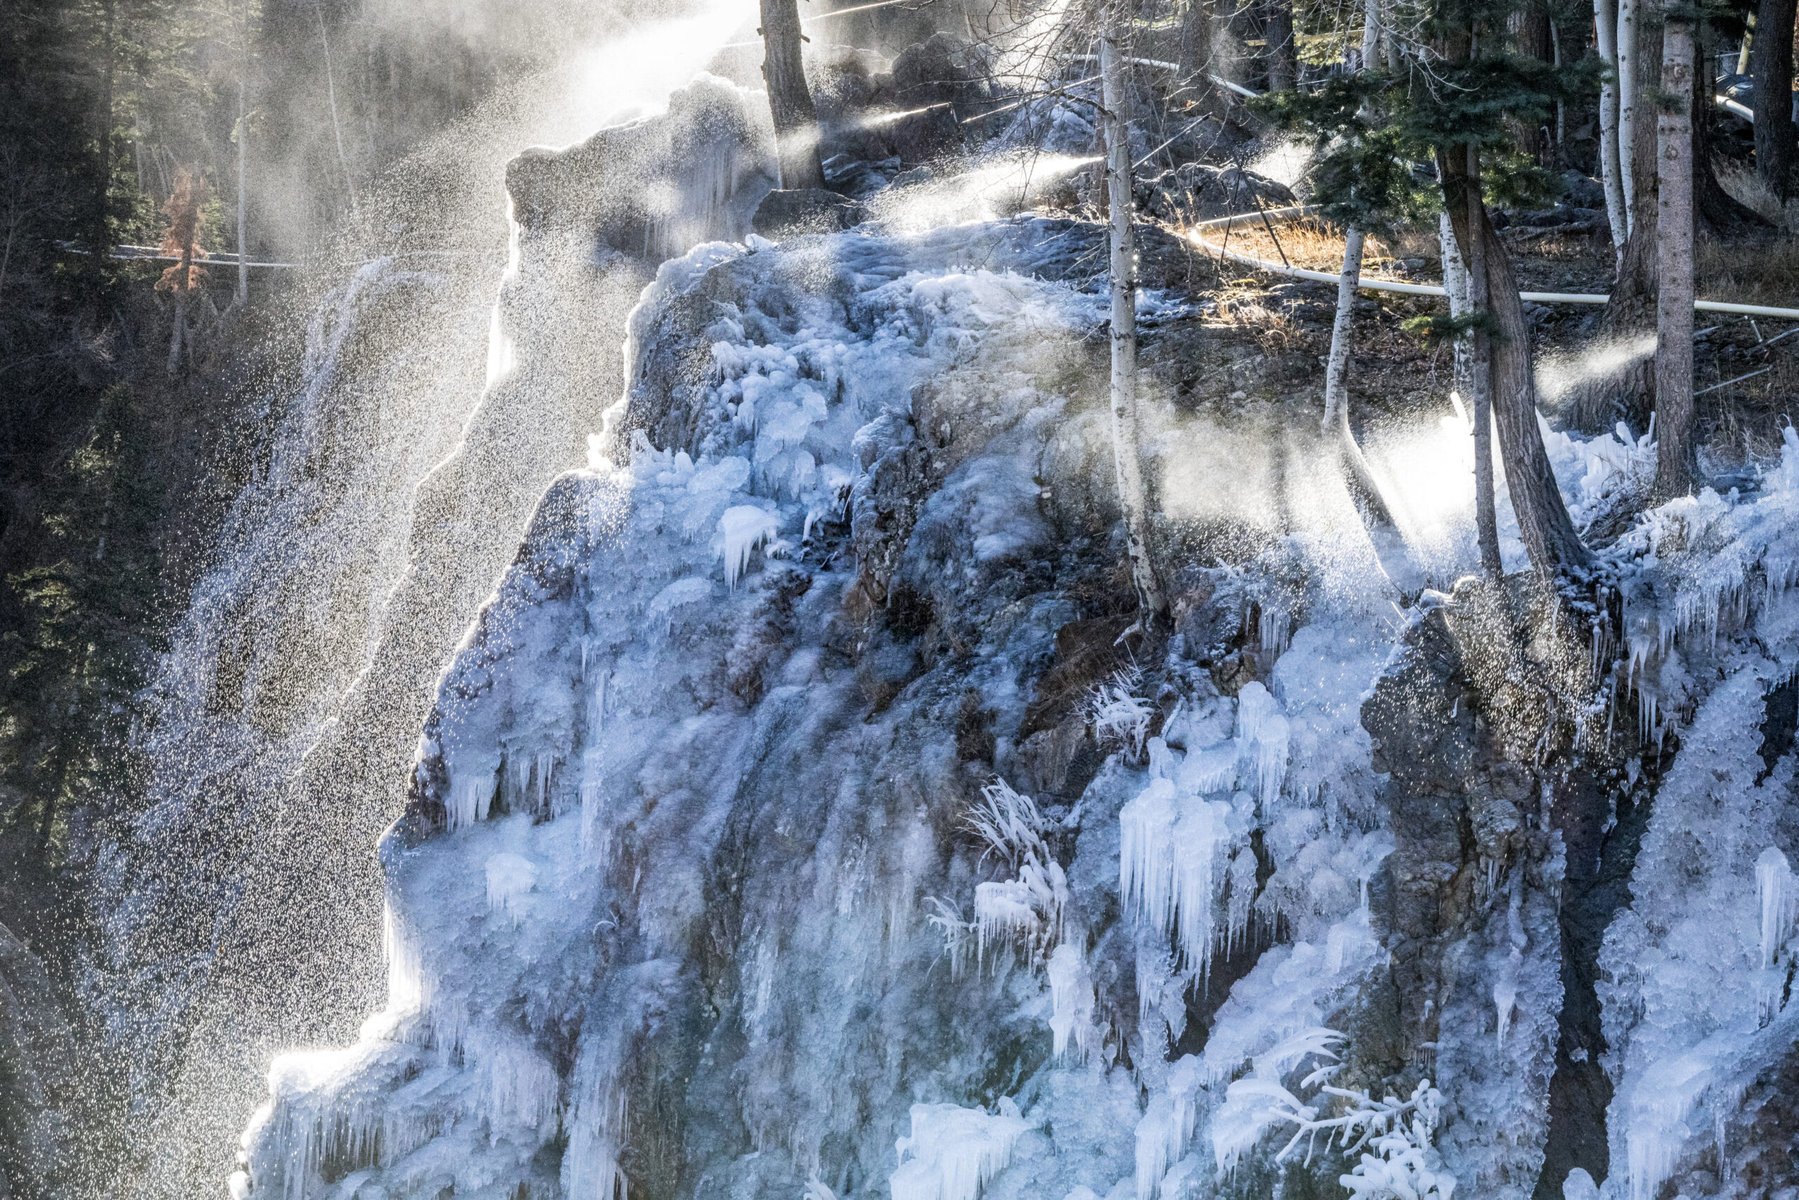 Sunlight glimmers on ice at the Ouray Ice Park.